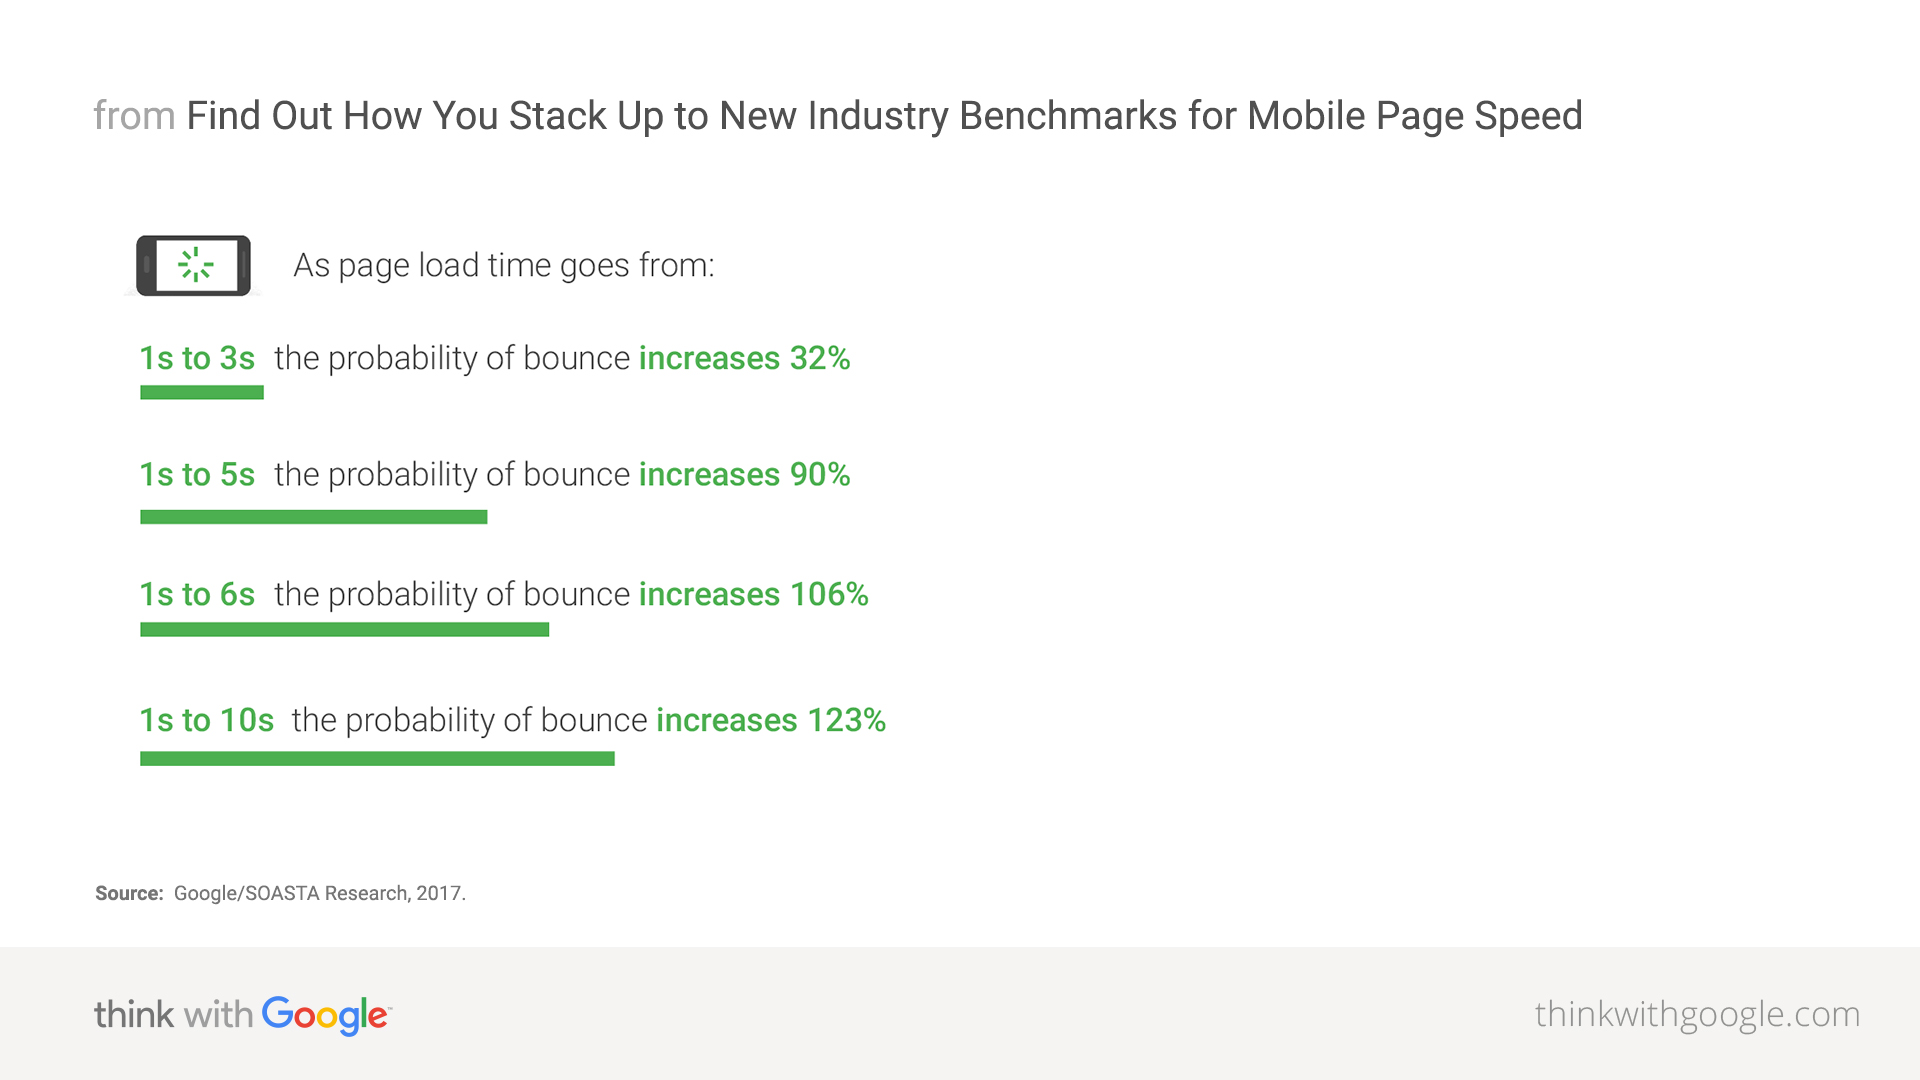 Mobile speed impacts the bounce rate